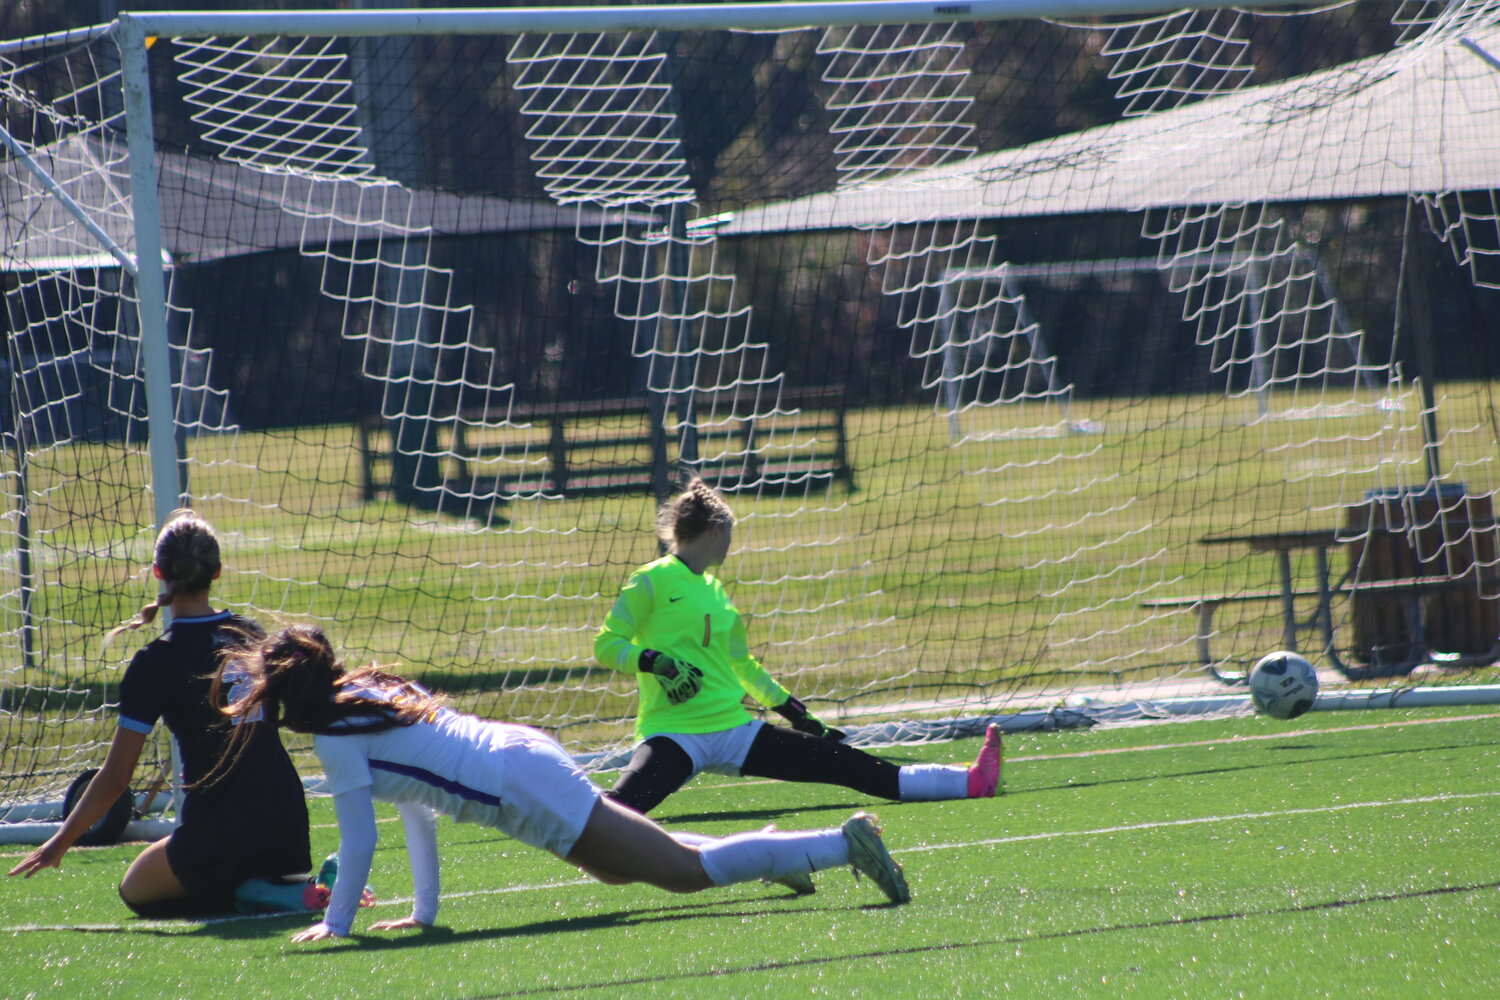 The Monteverde goalkeeper can only watch the ball fly by her after a shot by Natalie Brooks.